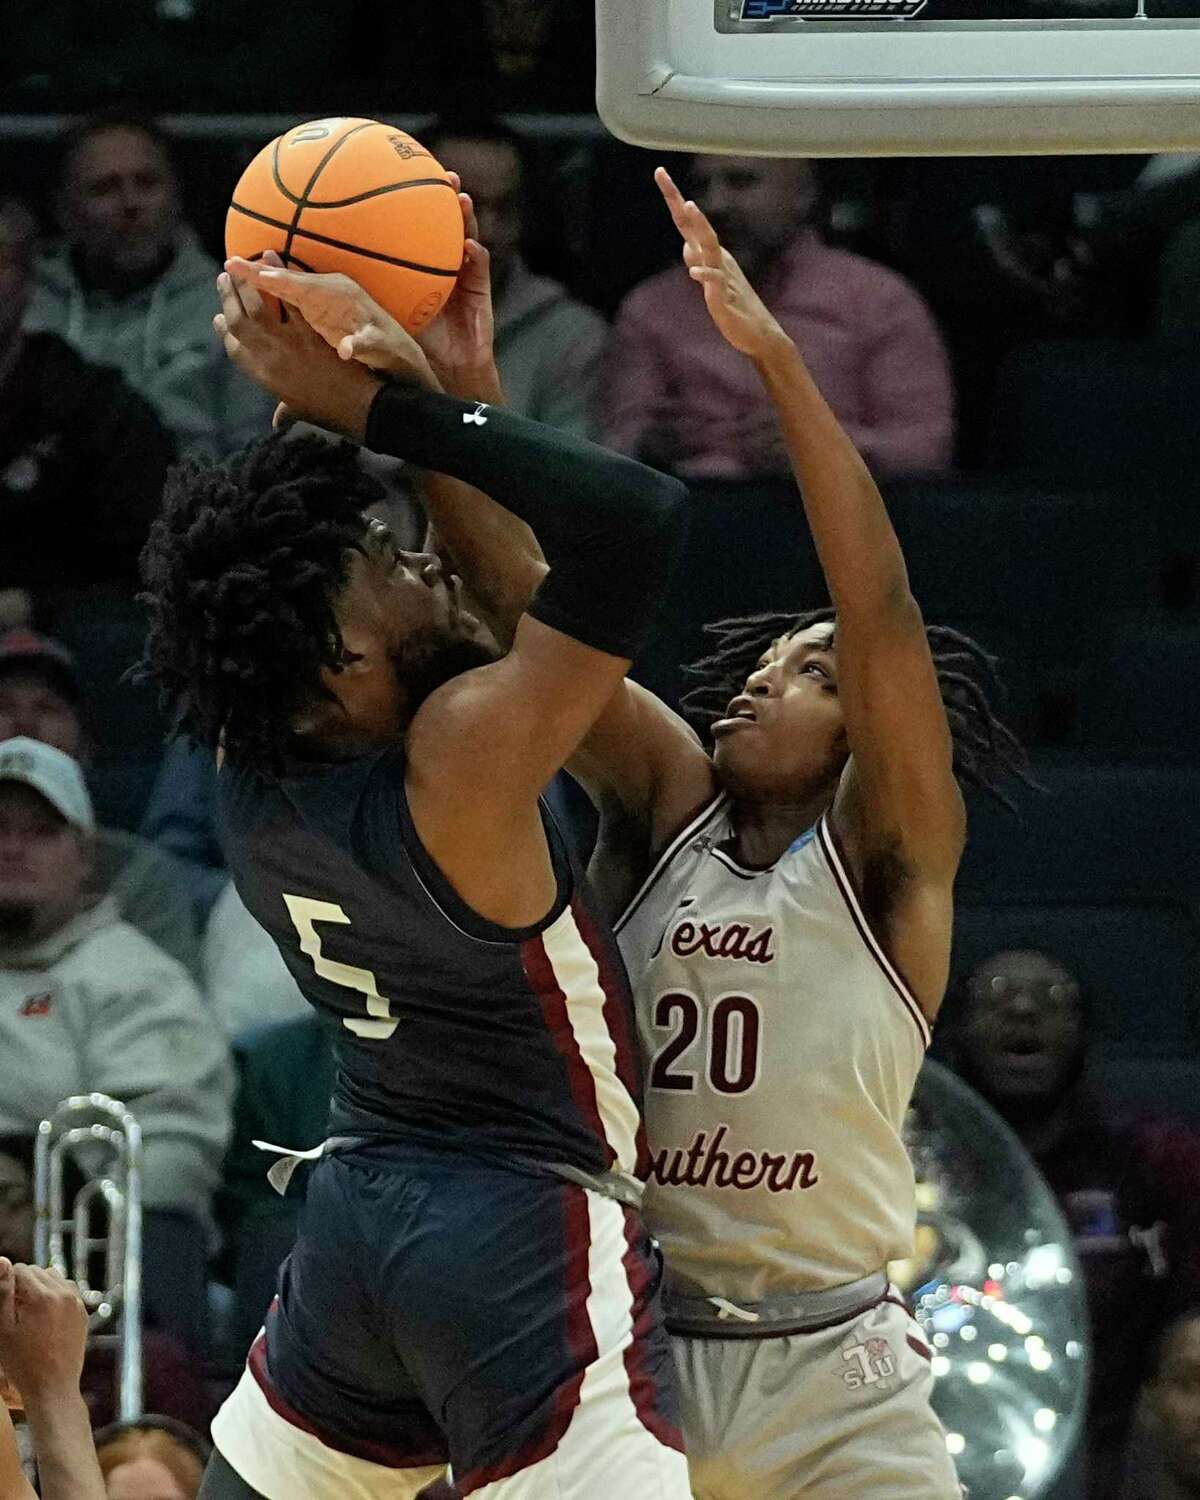 Fairleigh Dickinson's Ansley Almonor (5) is fouled by Texas Southern's Kehlin Farooq (20) as he shoots during the first half of a First Four college basketball game in the NCAA men's basketball tournament, Wednesday, March 15, 2023, in Dayton, Ohio. (AP Photo/Darron Cummings)